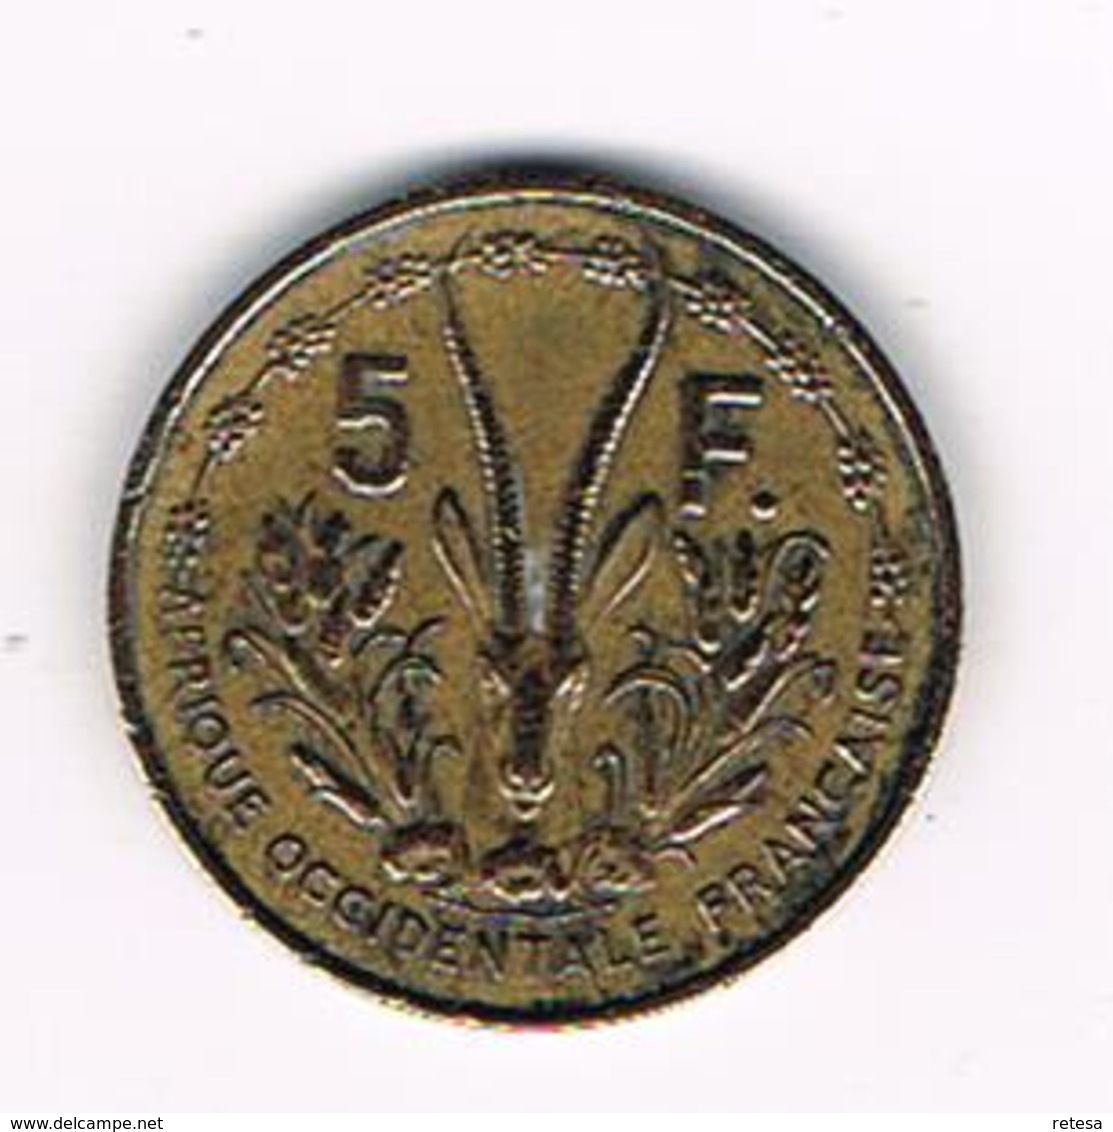 -&  FRENCH WEST AFRICA  5 FRANCS  1956 - Central African Republic